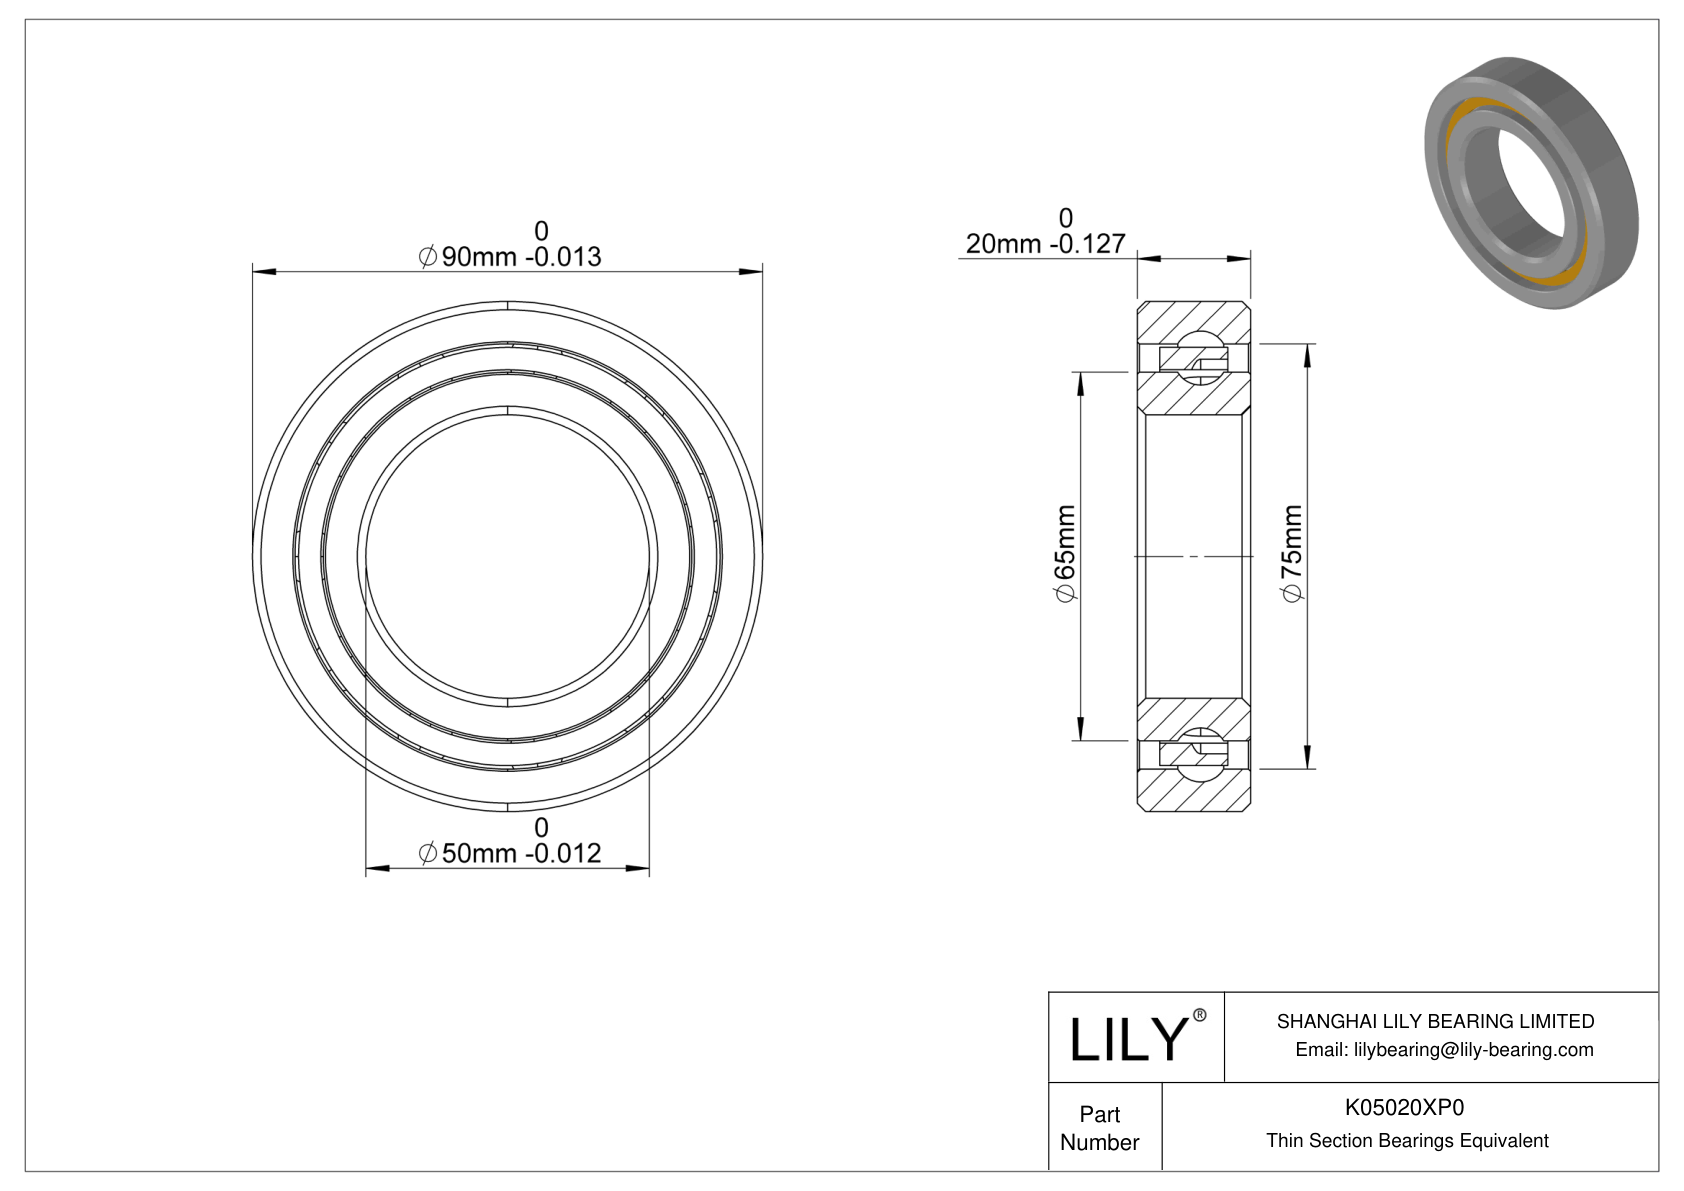 K05020XP0 Constant Section (CS) Bearings cad drawing